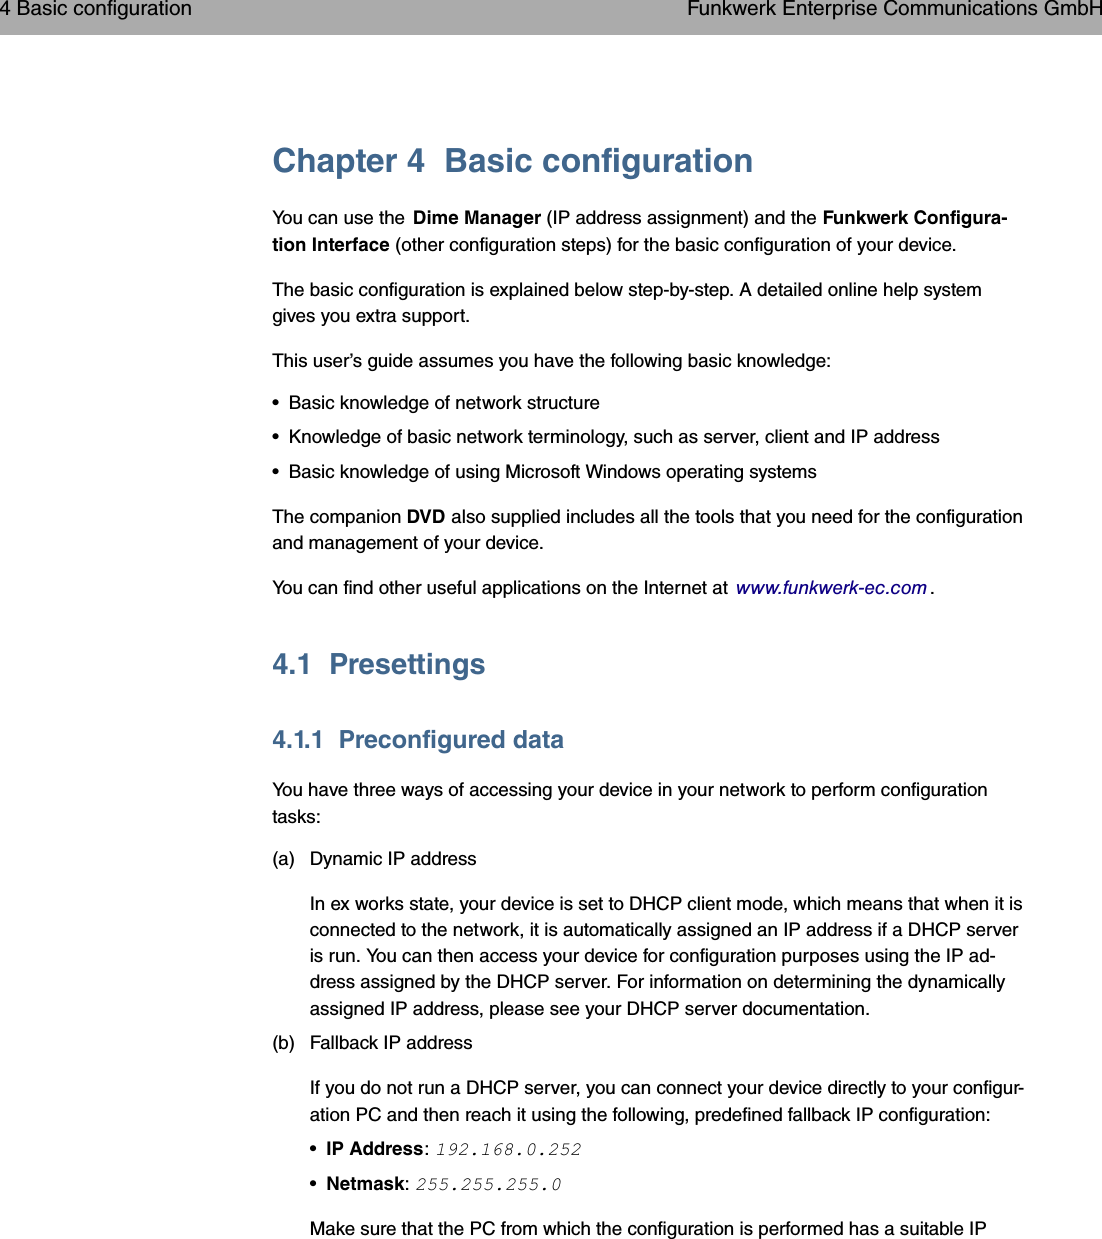 Chapter 4 Basic configurationYou can use the Dime Manager (IP address assignment) and the Funkwerk Configura-tion Interface (other configuration steps) for the basic configuration of your device.The basic configuration is explained below step-by-step. A detailed online help systemgives you extra support.This user’s guide assumes you have the following basic knowledge:• Basic knowledge of network structure• Knowledge of basic network terminology, such as server, client and IP address• Basic knowledge of using Microsoft Windows operating systemsThe companion DVD also supplied includes all the tools that you need for the configurationand management of your device.You can find other useful applications on the Internet at www.funkwerk-ec.com .4.1 Presettings4.1.1 Preconfigured dataYou have three ways of accessing your device in your network to perform configurationtasks:(a) Dynamic IP addressIn ex works state, your device is set to DHCP client mode, which means that when it isconnected to the network, it is automatically assigned an IP address if a DHCP serveris run. You can then access your device for configuration purposes using the IP ad-dress assigned by the DHCP server. For information on determining the dynamicallyassigned IP address, please see your DHCP server documentation.(b) Fallback IP addressIf you do not run a DHCP server, you can connect your device directly to your configur-ation PC and then reach it using the following, predefined fallback IP configuration:•IP Address:•Netmask:Make sure that the PC from which the configuration is performed has a suitable IP4 Basic configuration Funkwerk Enterprise Communications GmbH14 bintec WLAN and Industrial WLAN